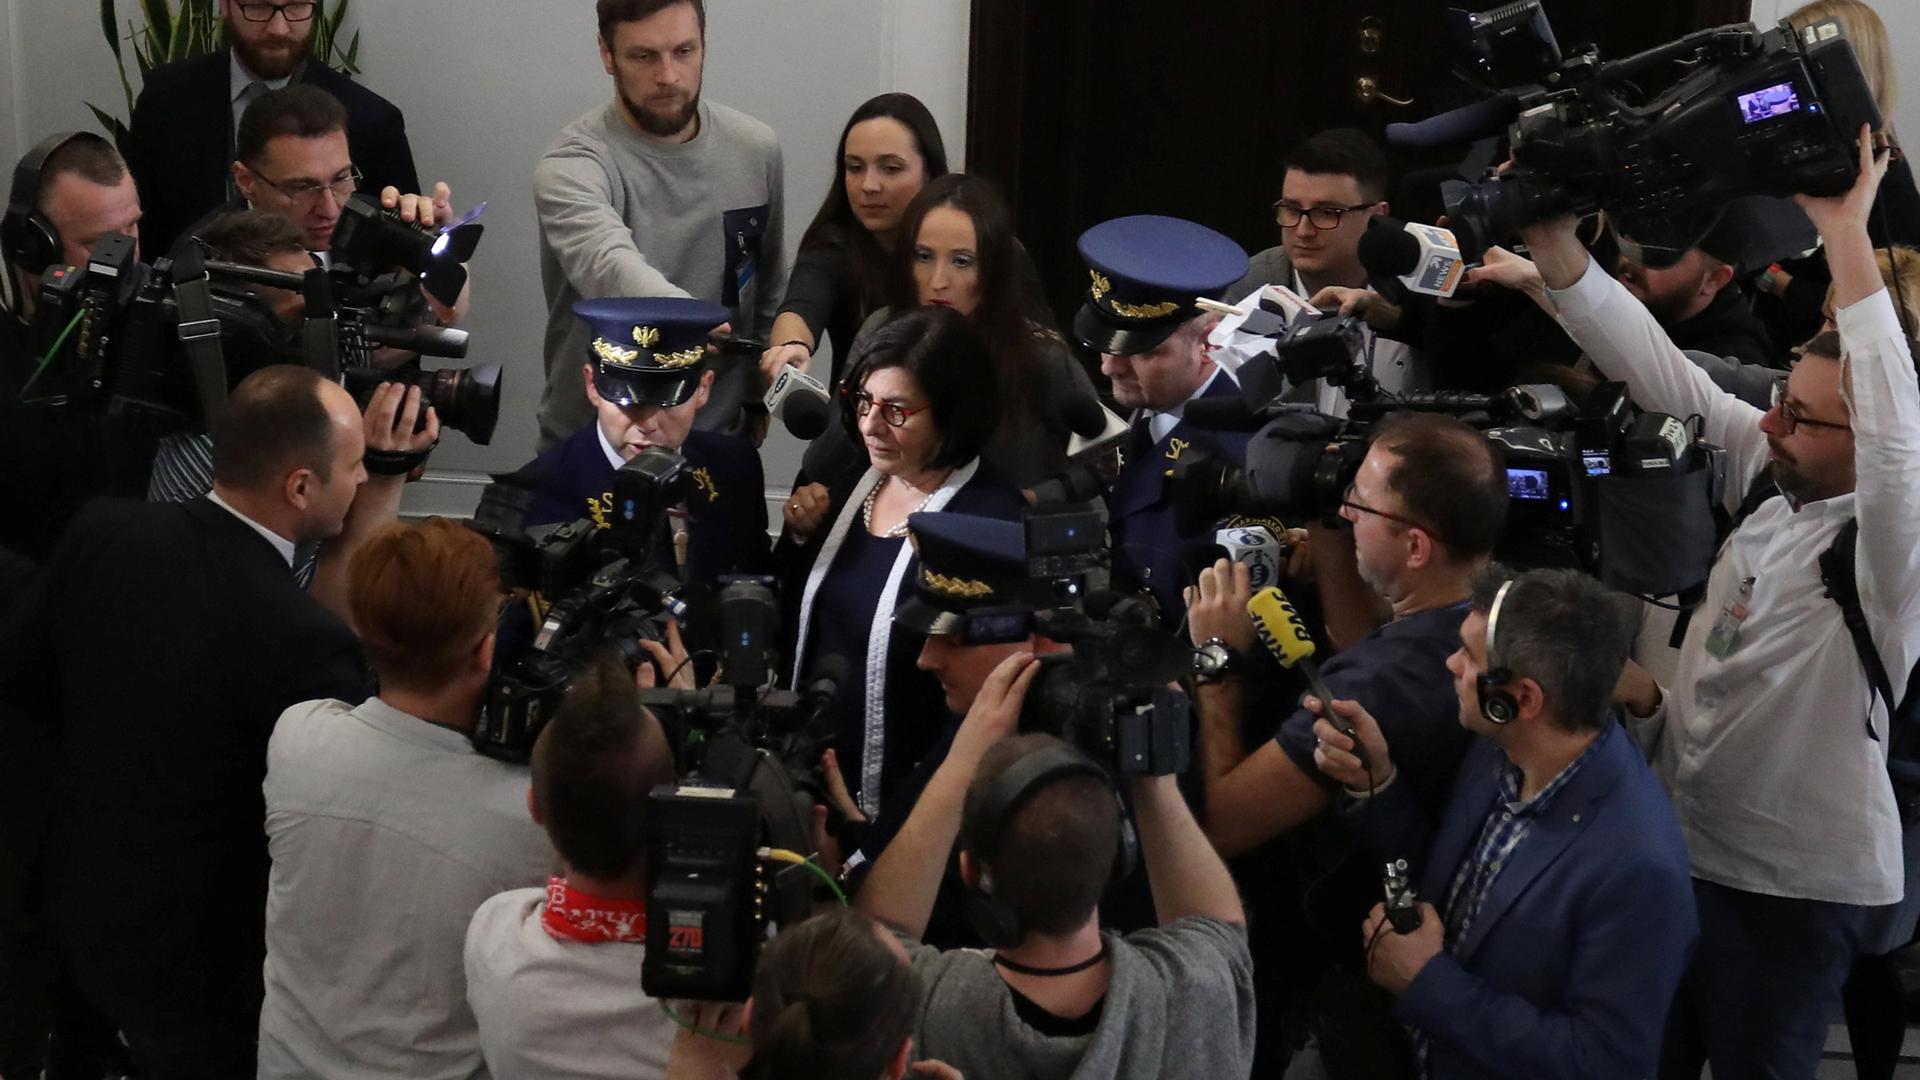 Israel's Ambassador to Poland, Anna Azari, is surrounded by photographers and security officials.